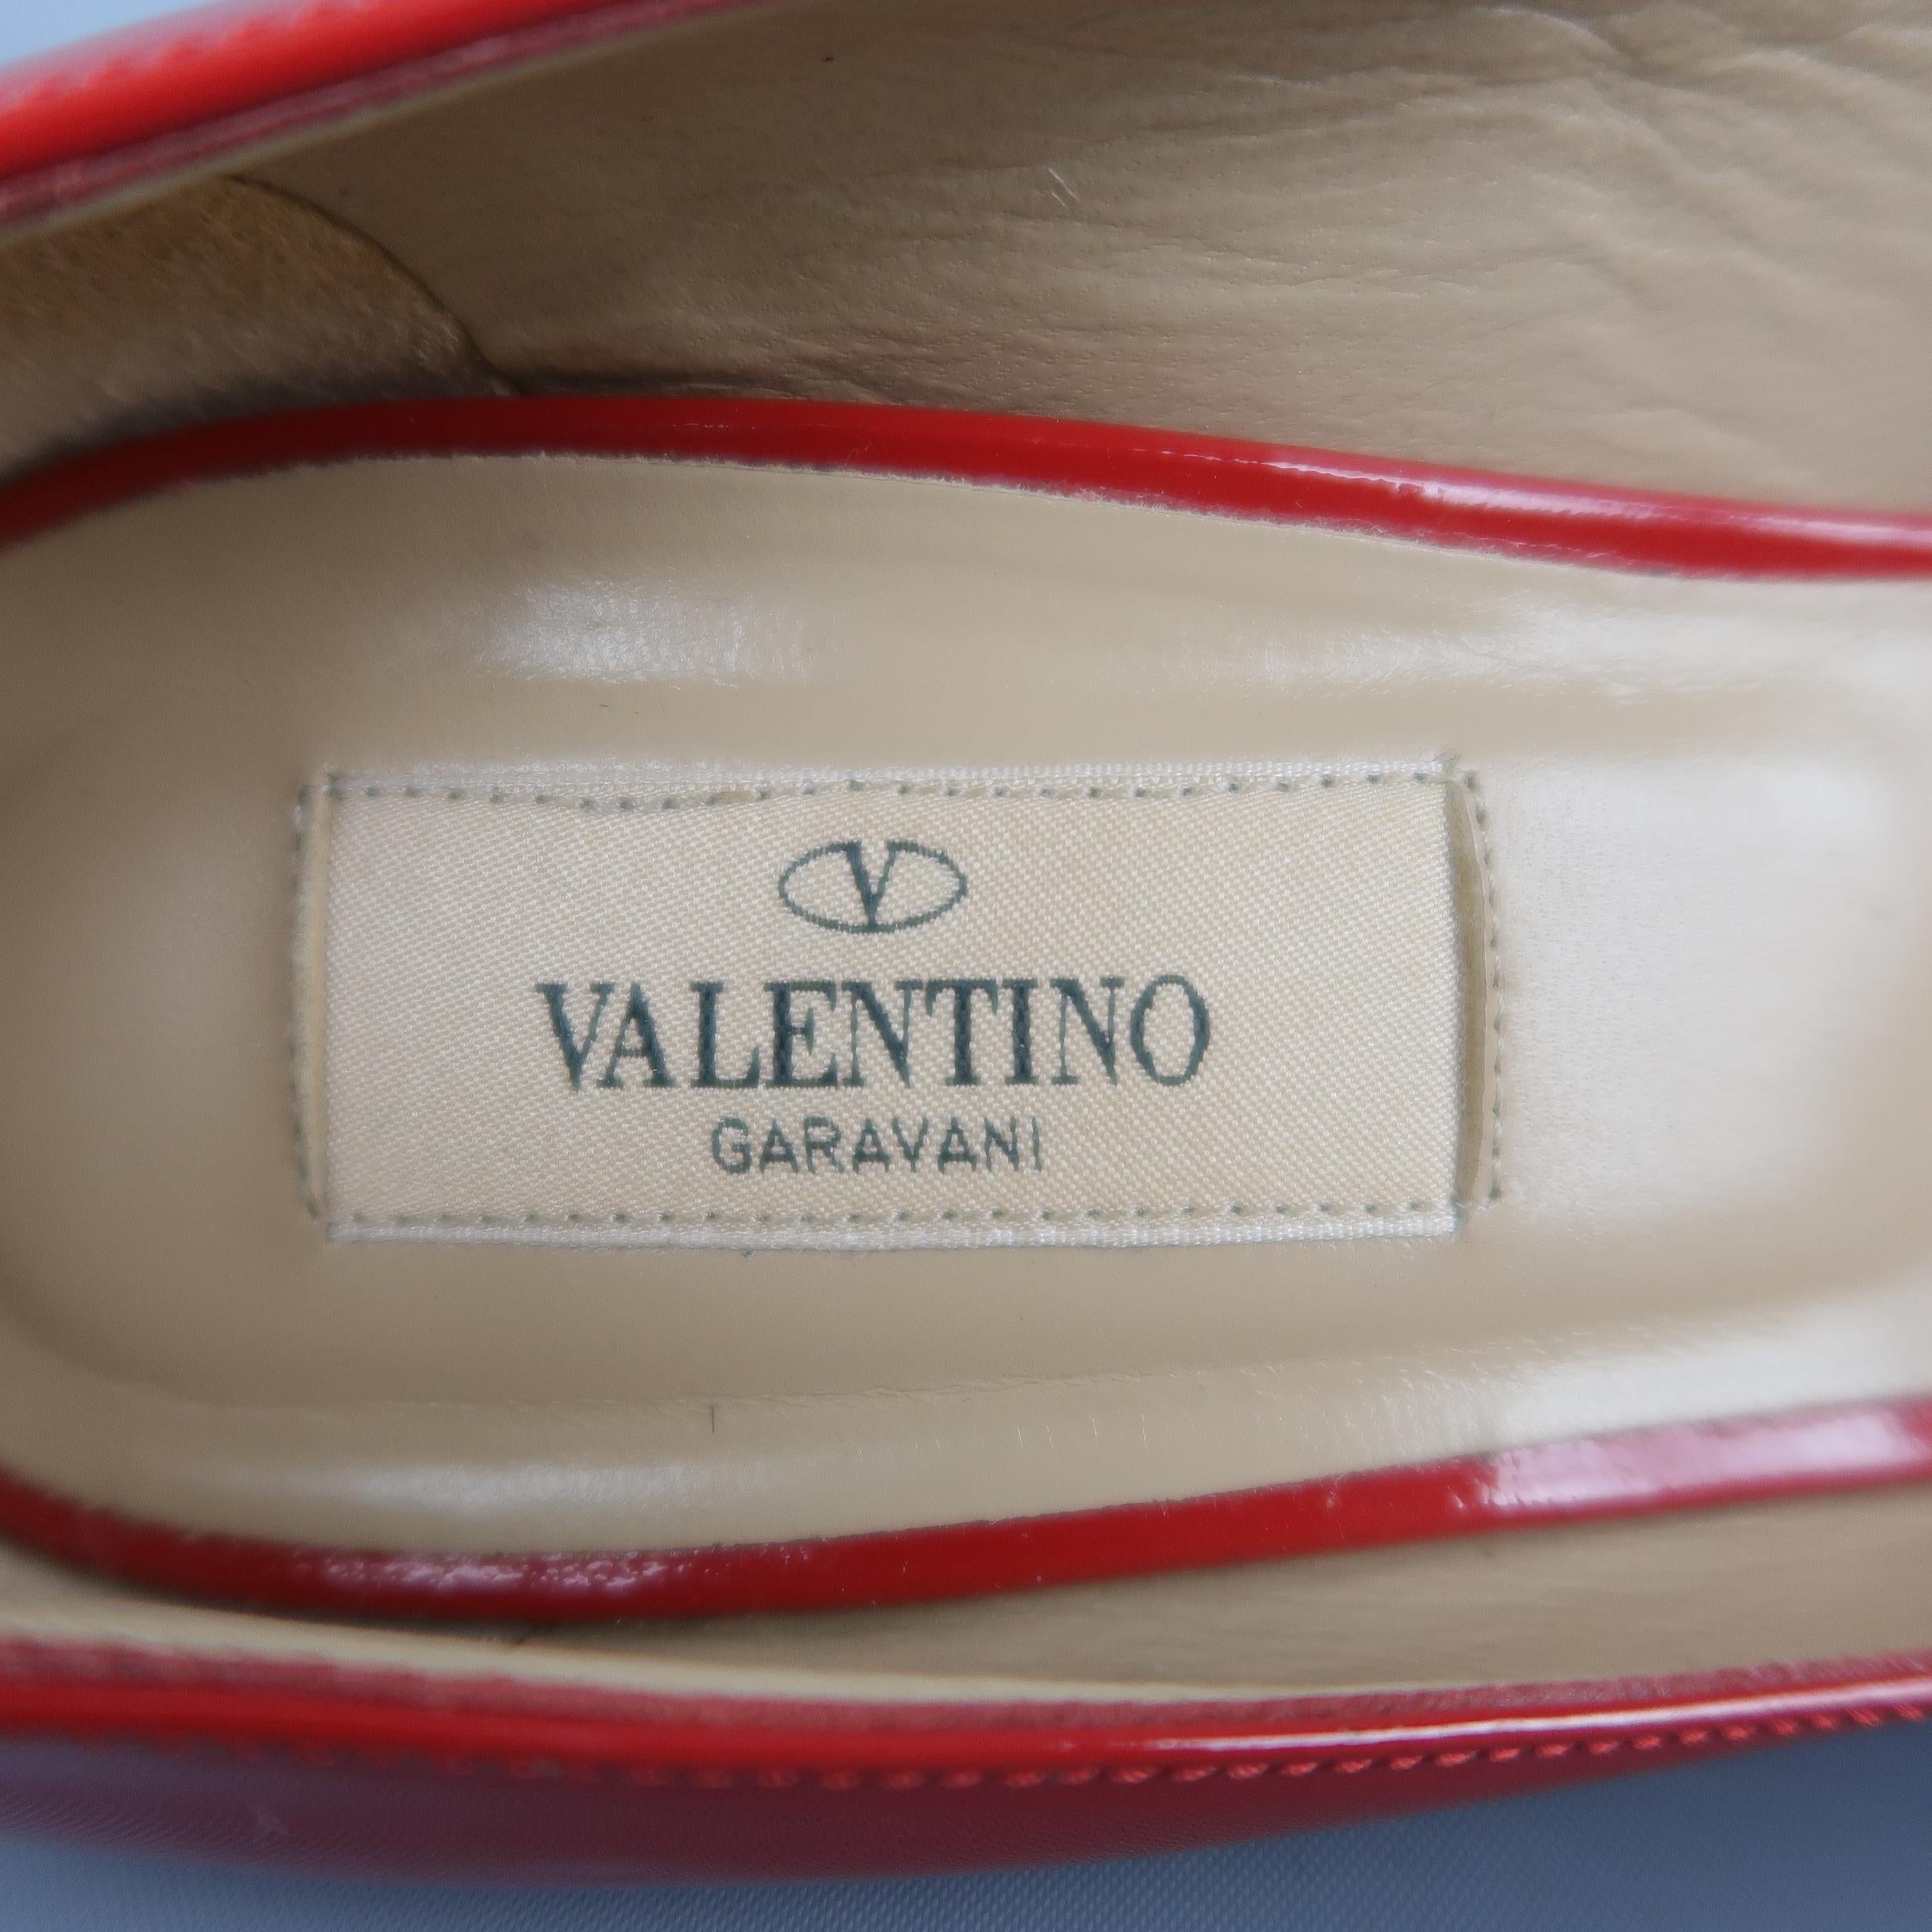 VALENTINO Size 8.5 Red Patent Leather Bow Peep Toe Pumps 3